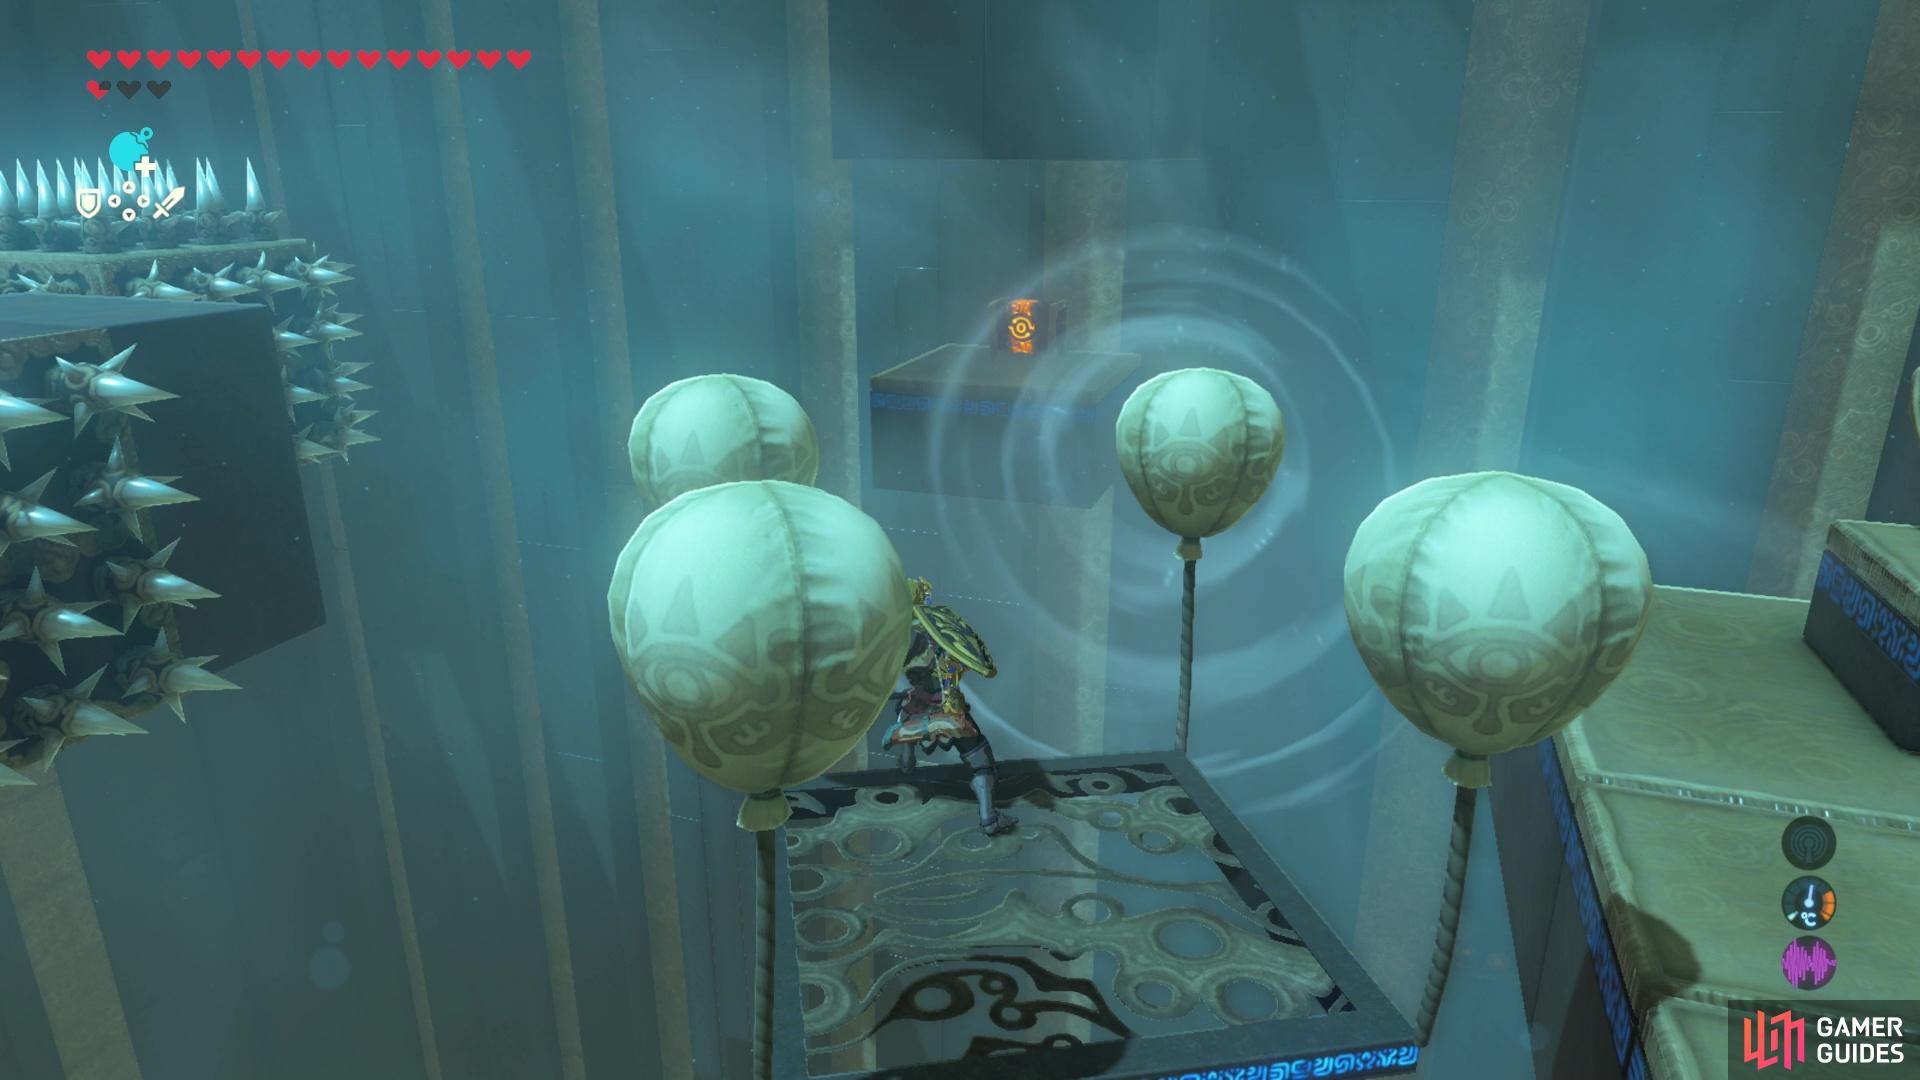 Use the second platform on balloons to grab the treasure